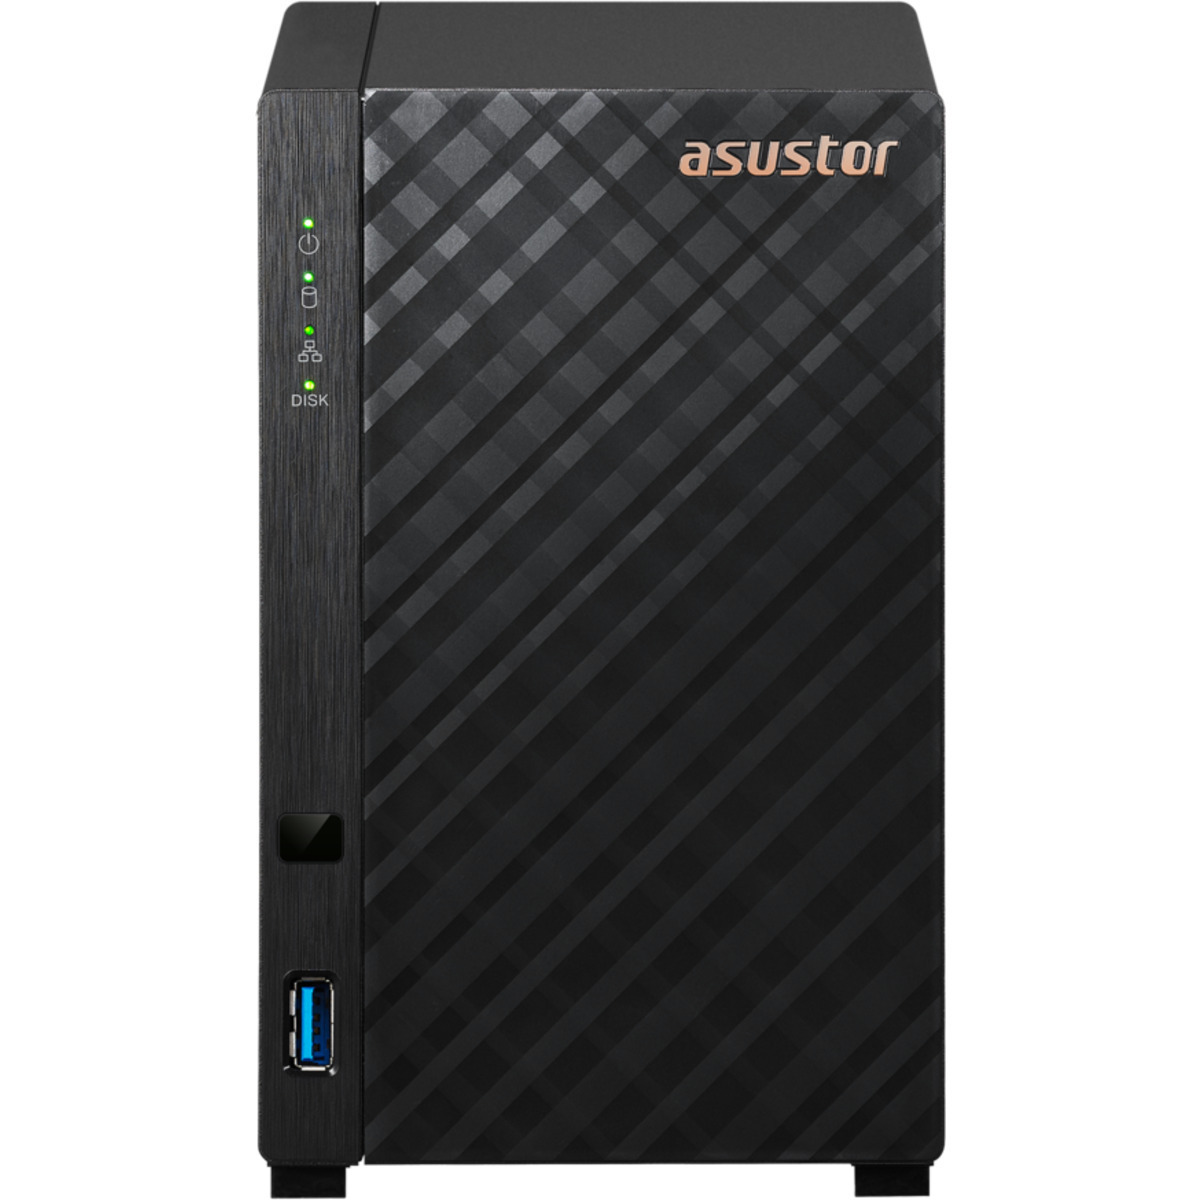 ASUSTOR DRIVESTOR 2 Lite AS1102TL 48tb 2-Bay Desktop Personal / Basic Home / Small Office NAS - Network Attached Storage Device 2x24tb Seagate IronWolf Pro ST24000NT002 3.5 7200rpm SATA 6Gb/s HDD NAS Class Drives Installed - Burn-In Tested DRIVESTOR 2 Lite AS1102TL